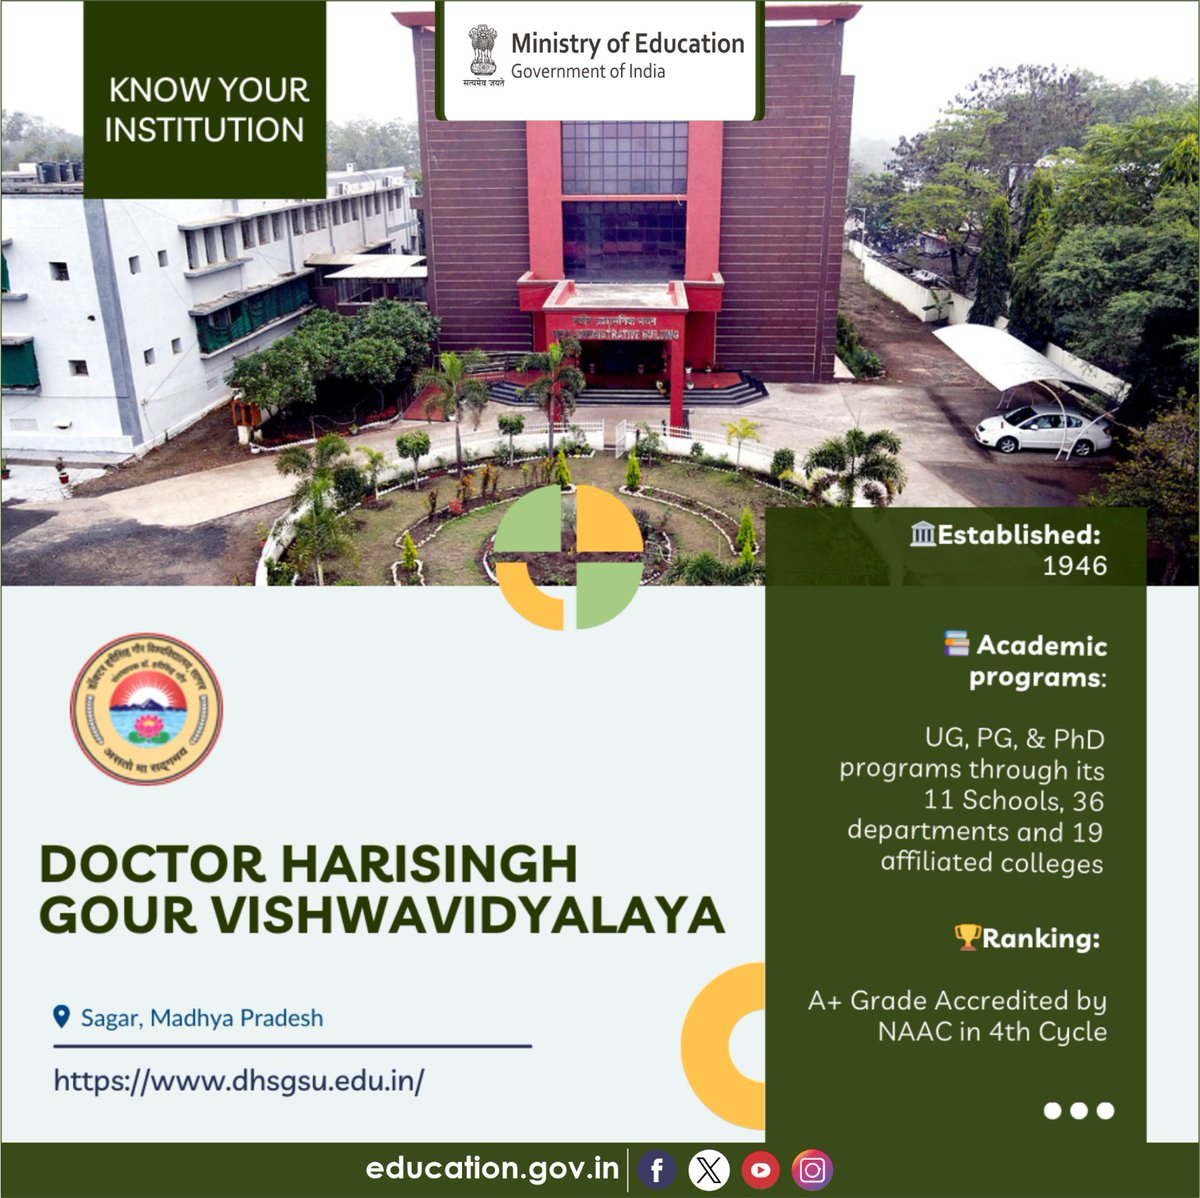 Know about the HEIs of India! Doctor Harisingh Gour Vishwavidyalaya was established in 1946 at Sagar, Madhya Pradesh. Accredited with an ‘A+’ Grade by NAAC and upgraded to a Central University in 2009, it embodies a rich academic legacy. Spread over 1300 acres and home to a